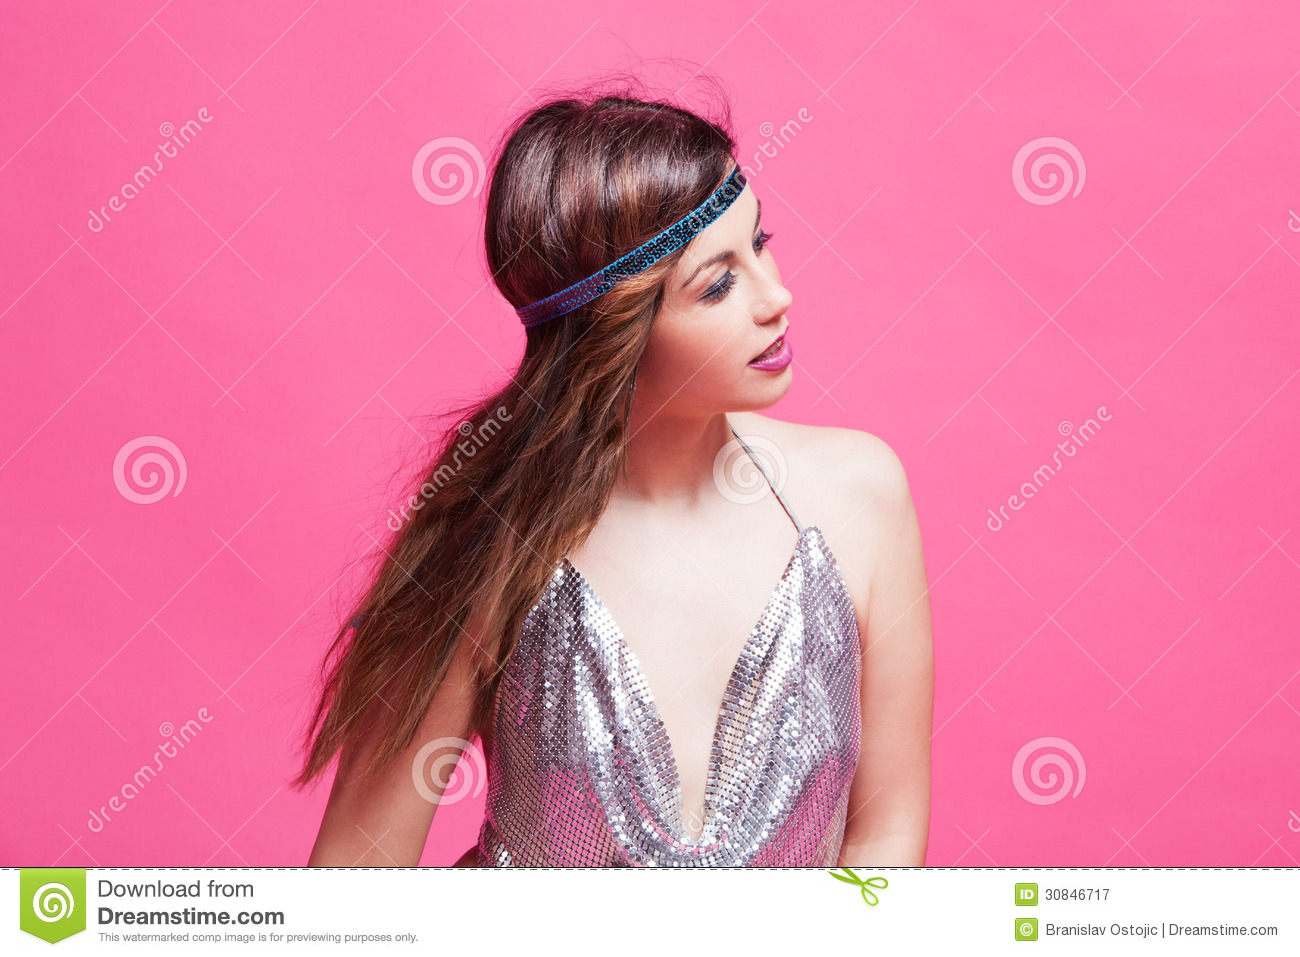 Young Woman In Hippie Style Studio Shot Pink Background